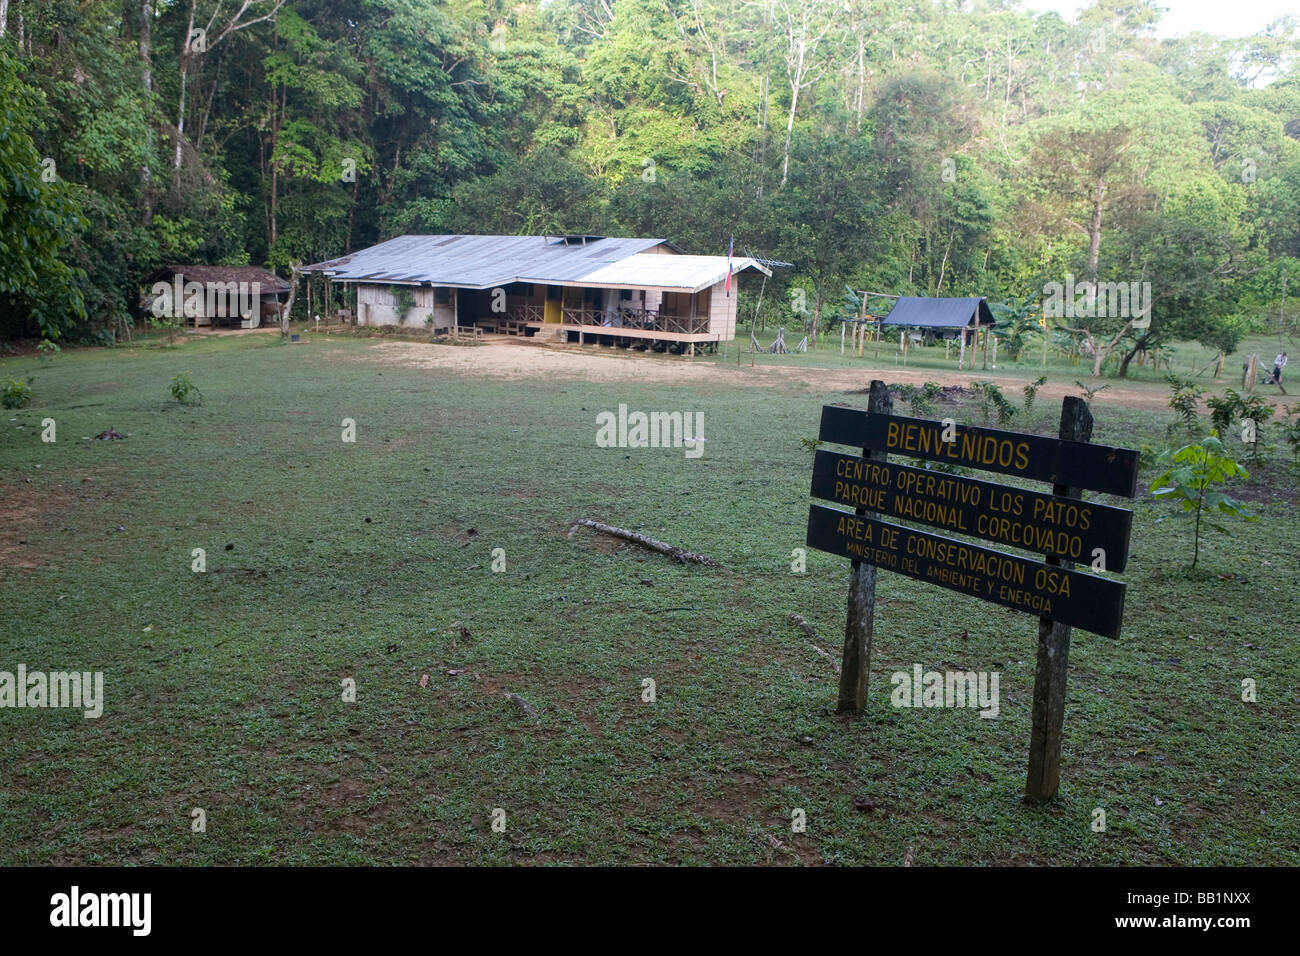 The Los Patos ranger station in the Corcovado National Park, Costa Rica. Stock Photo